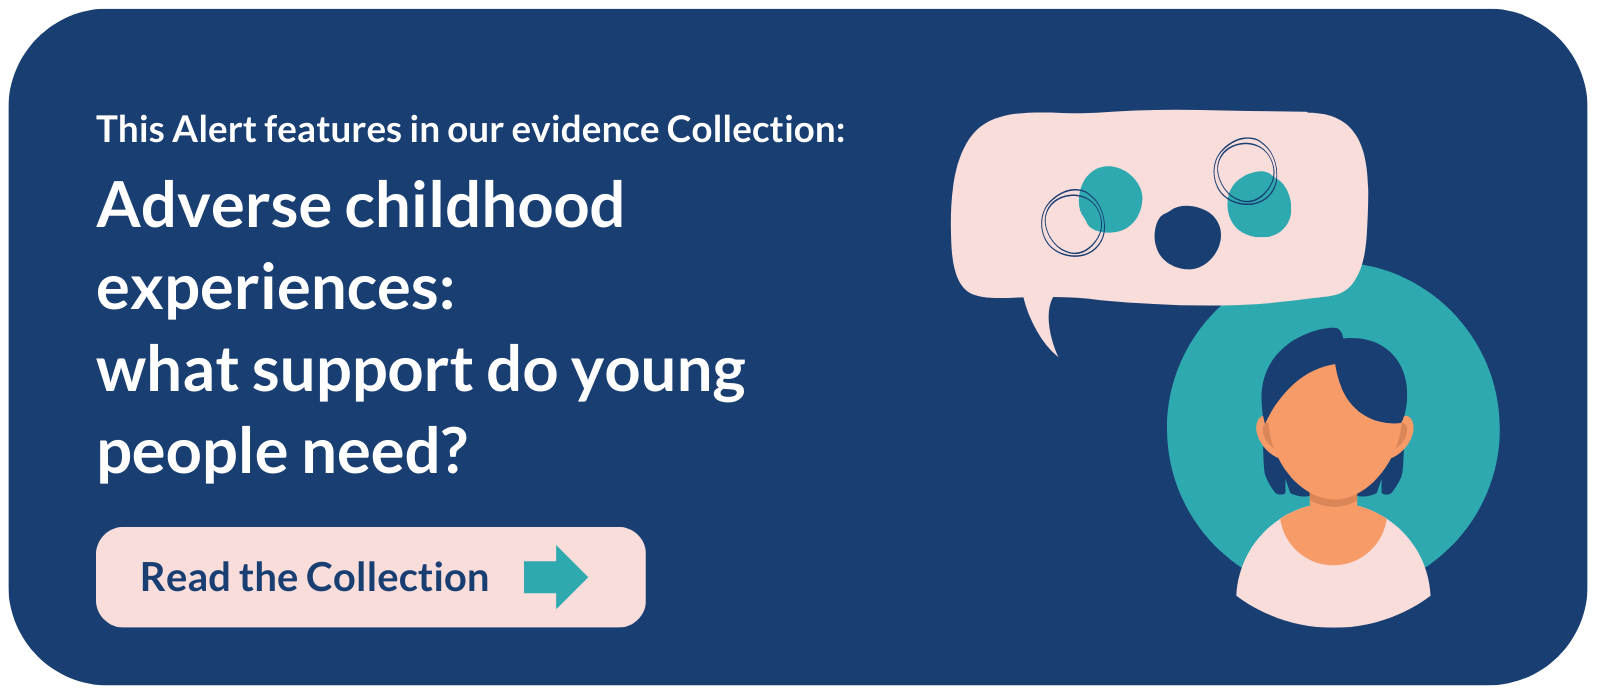 This Alert features in our evidence Collection: Adverse childhood experiences: what support do young people need? Read the Collection